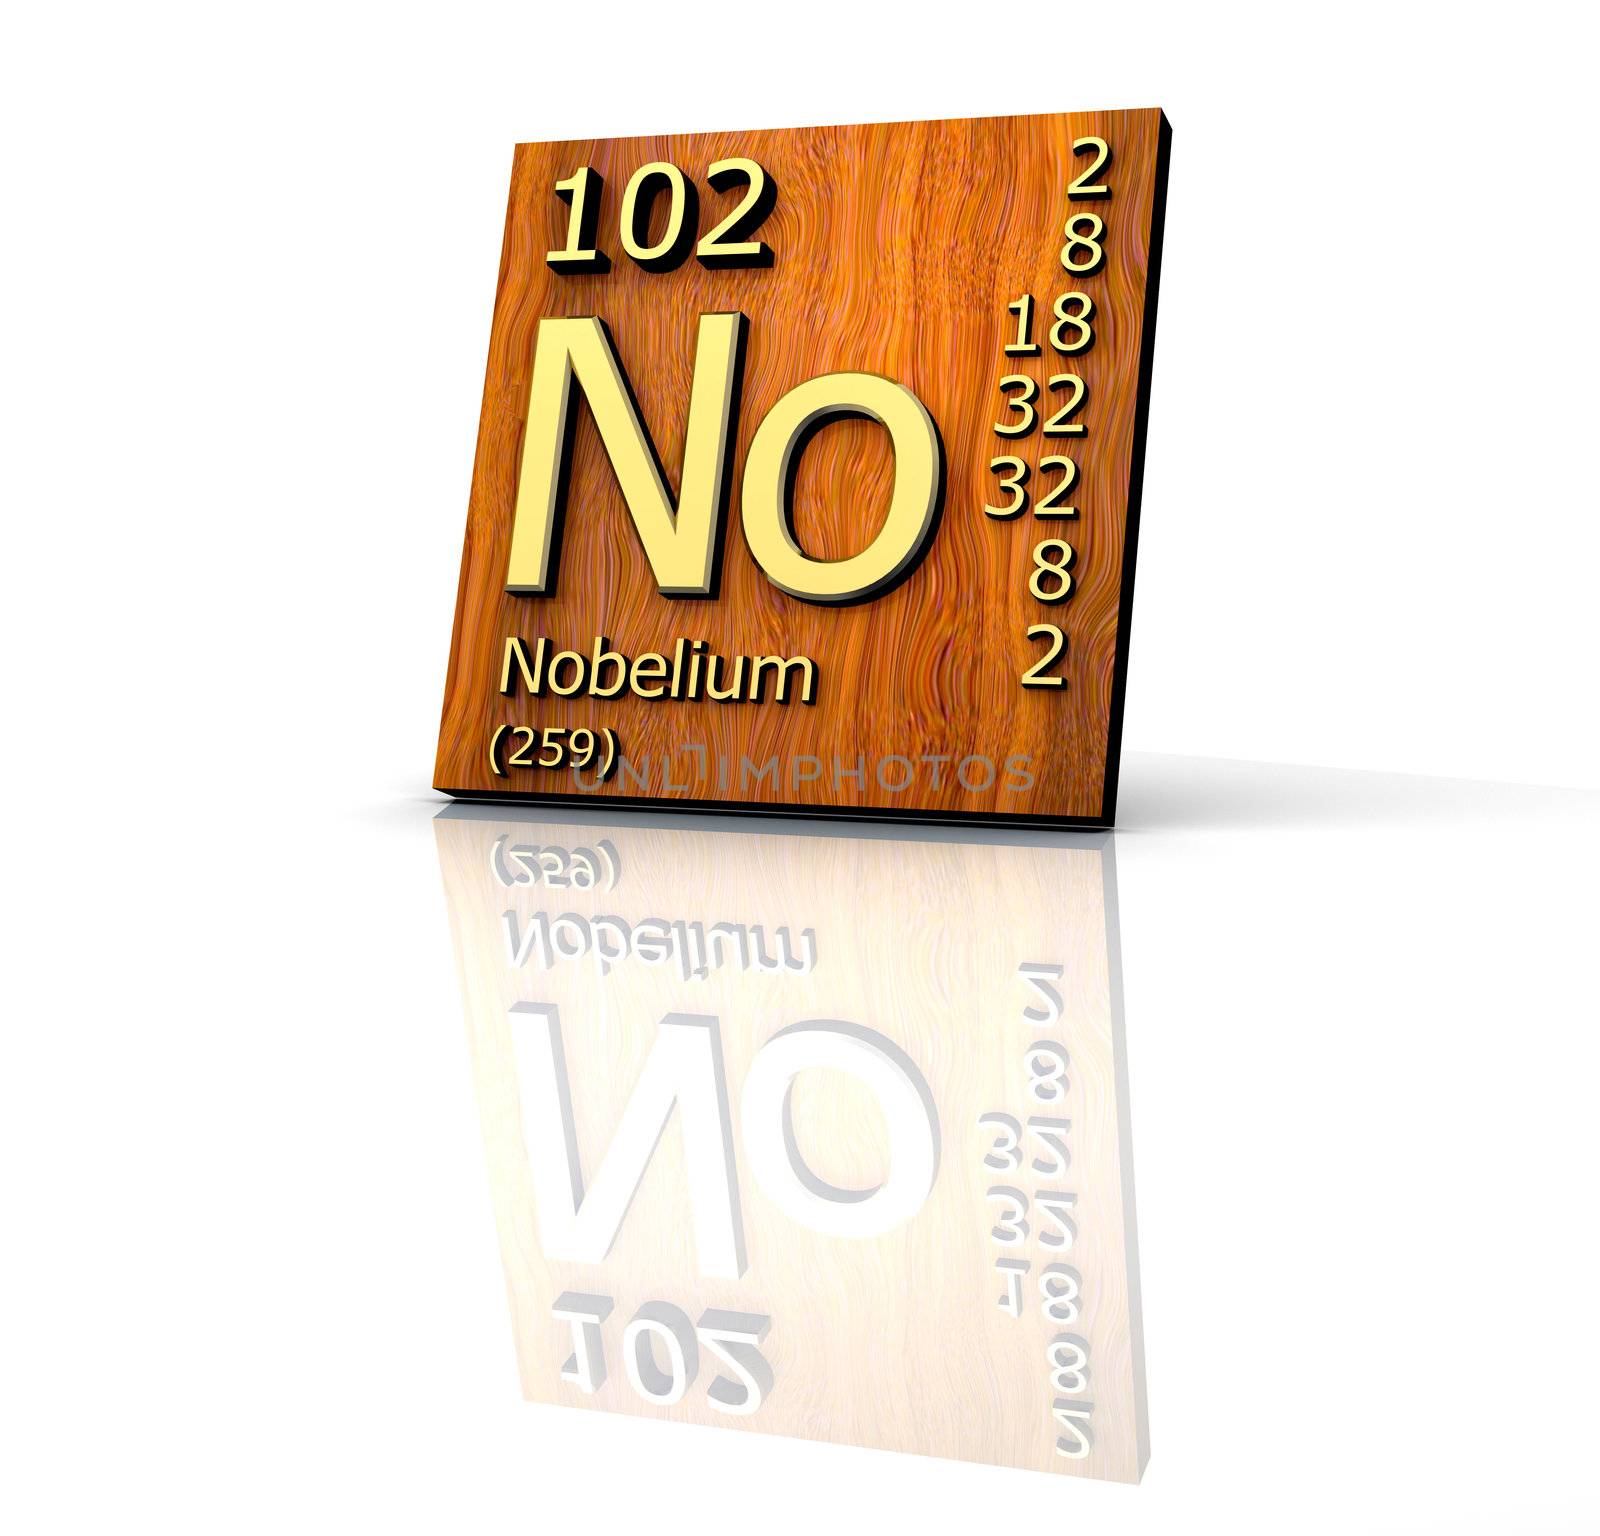 Nobelium Periodic Table of Elements - wood board - 3d made